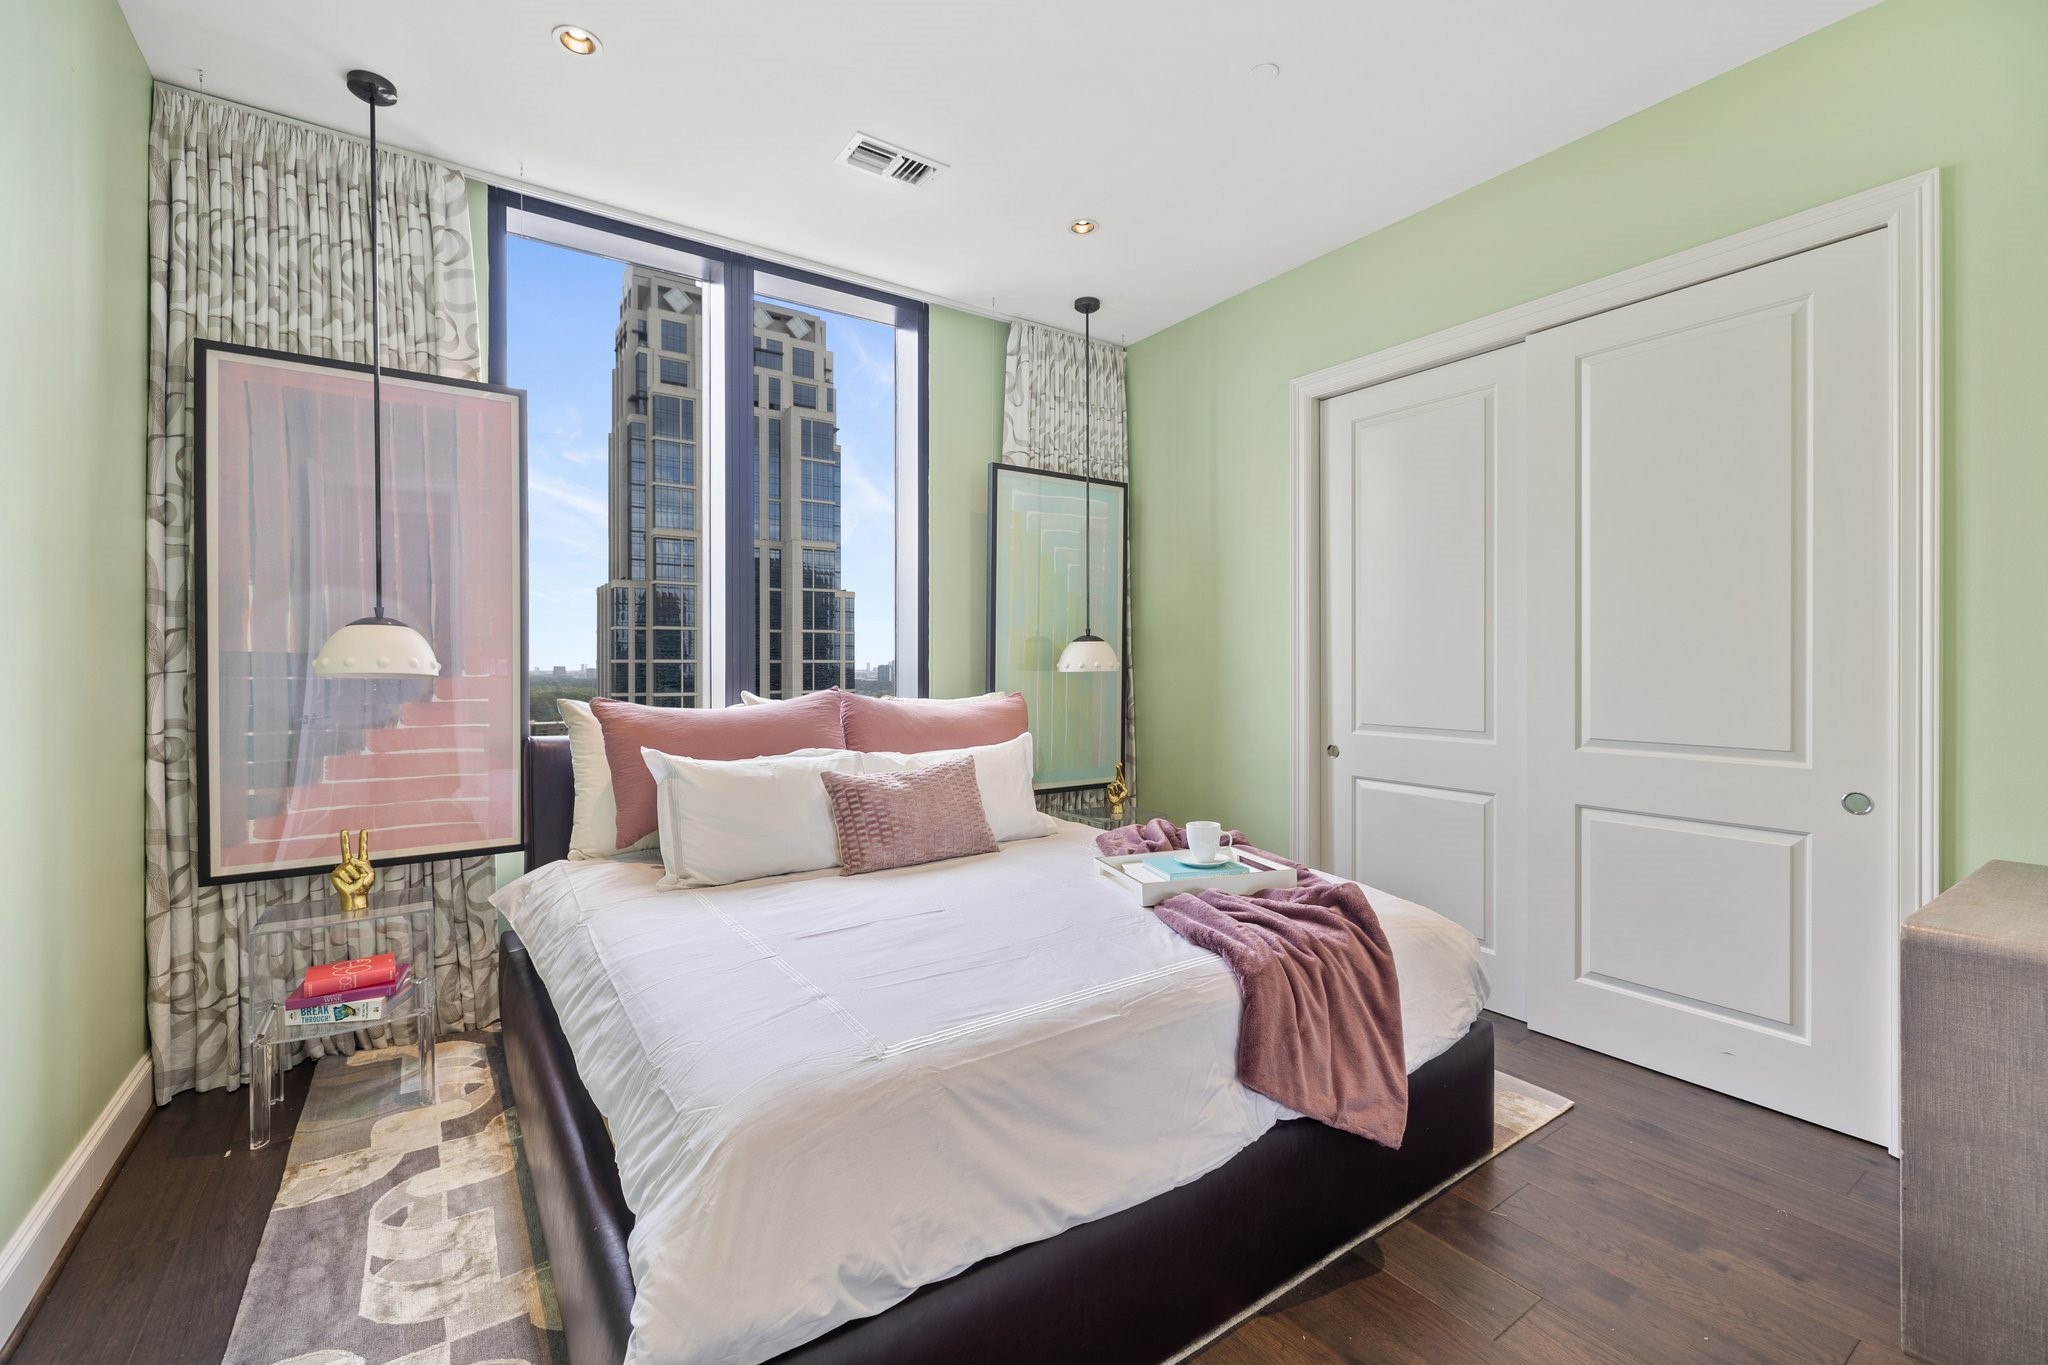 A bedroom with expansive city views through the large windows, complemented by artistic decor elements.